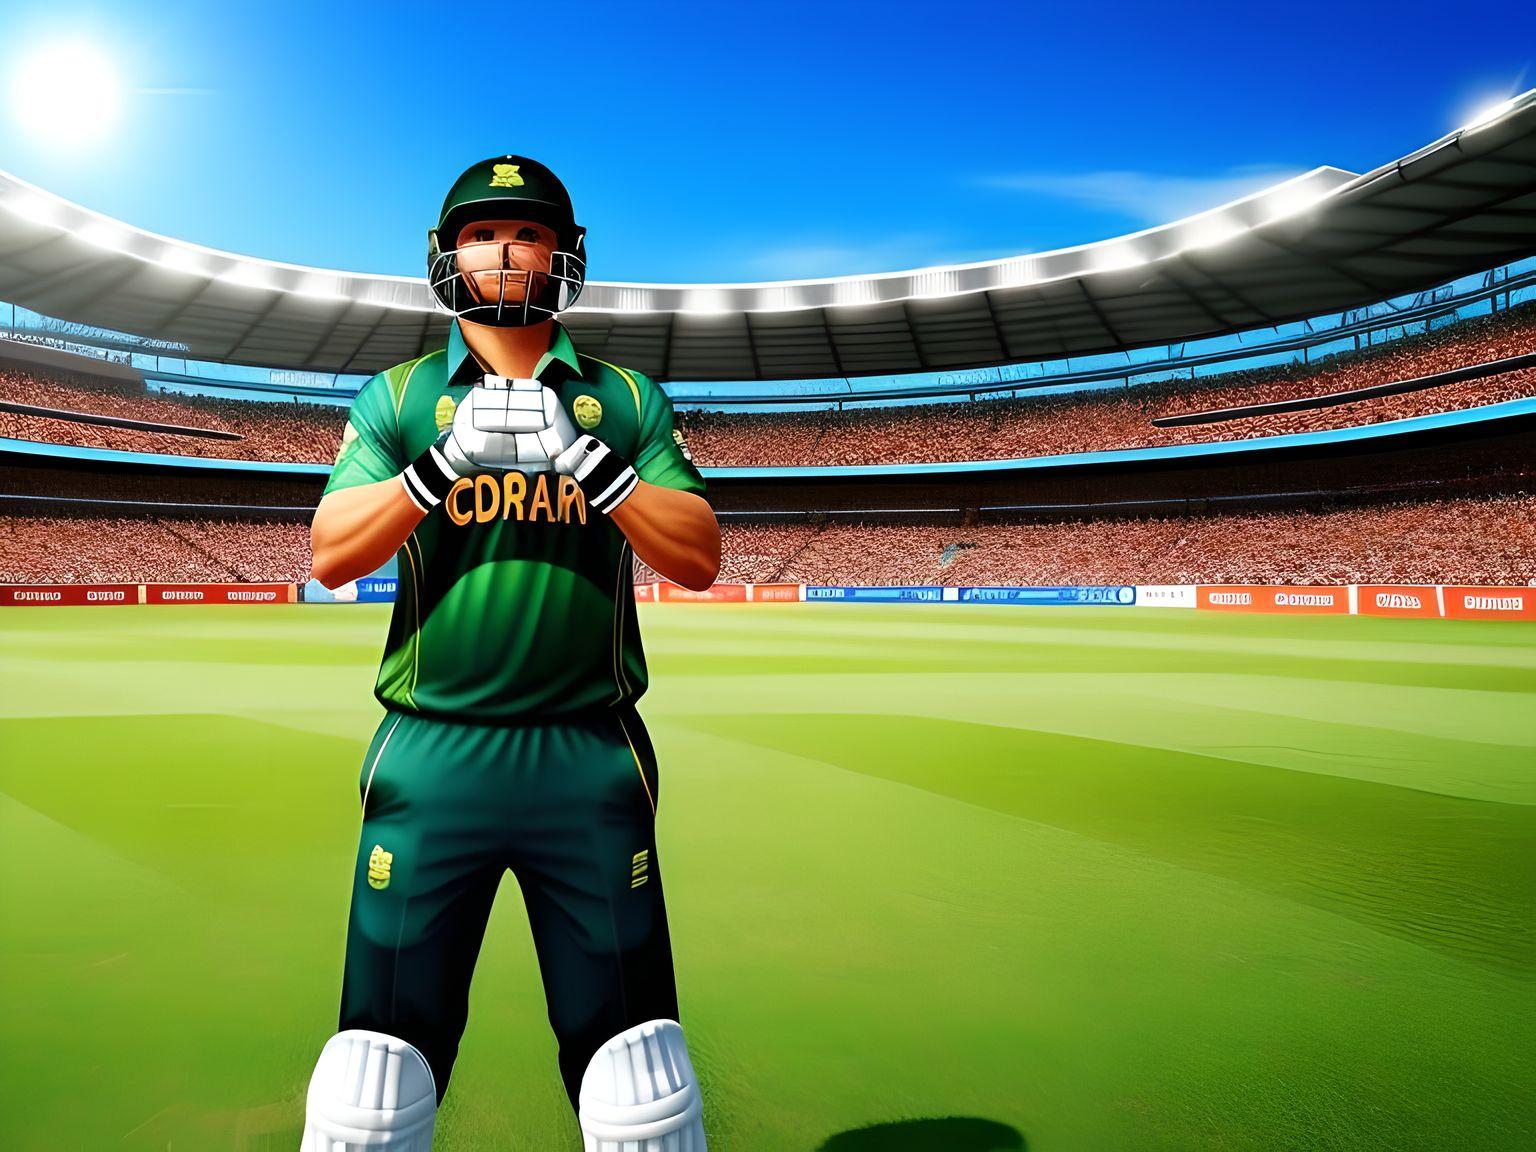 Best Cricket Games for Laptops: Top Gaming Options in 2023